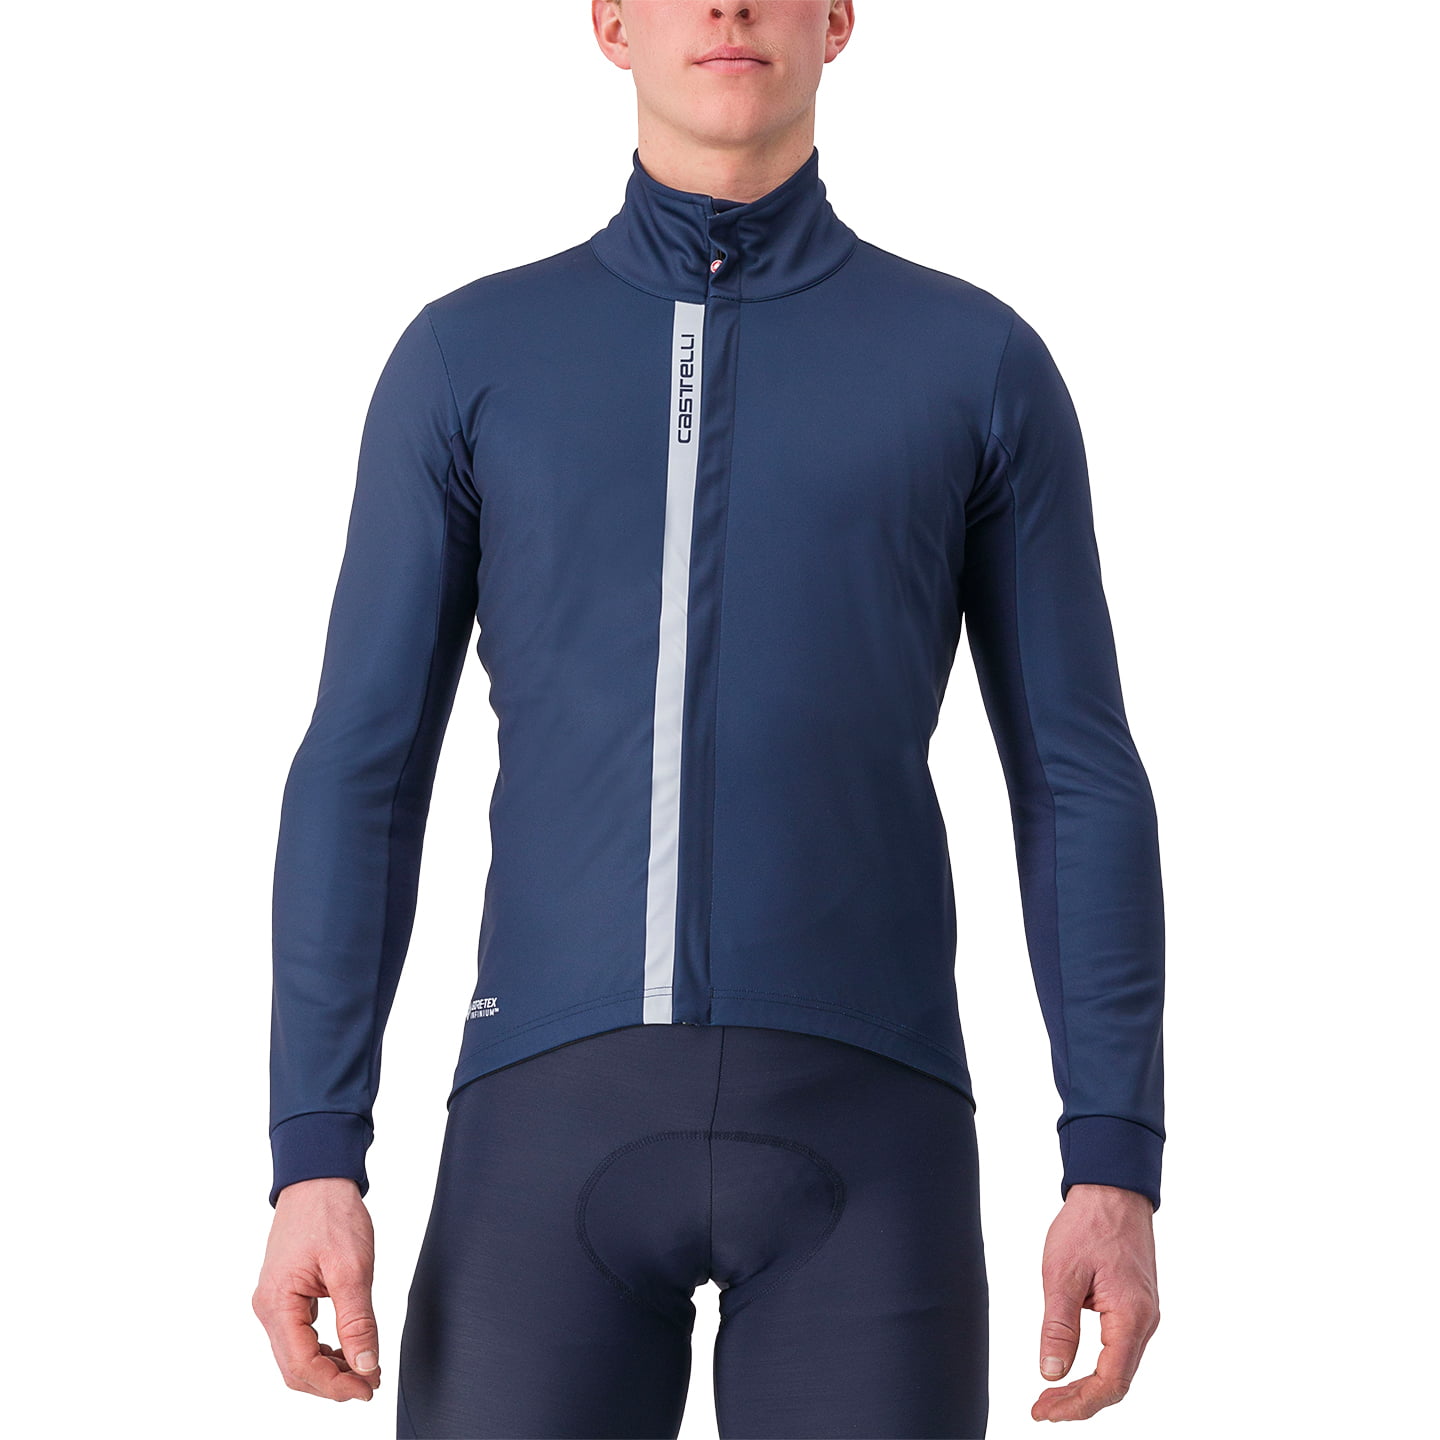 CASTELLI Winter Jacket Entrata Thermal Jacket, for men, size 2XL, Winter jacket, Cycling clothing